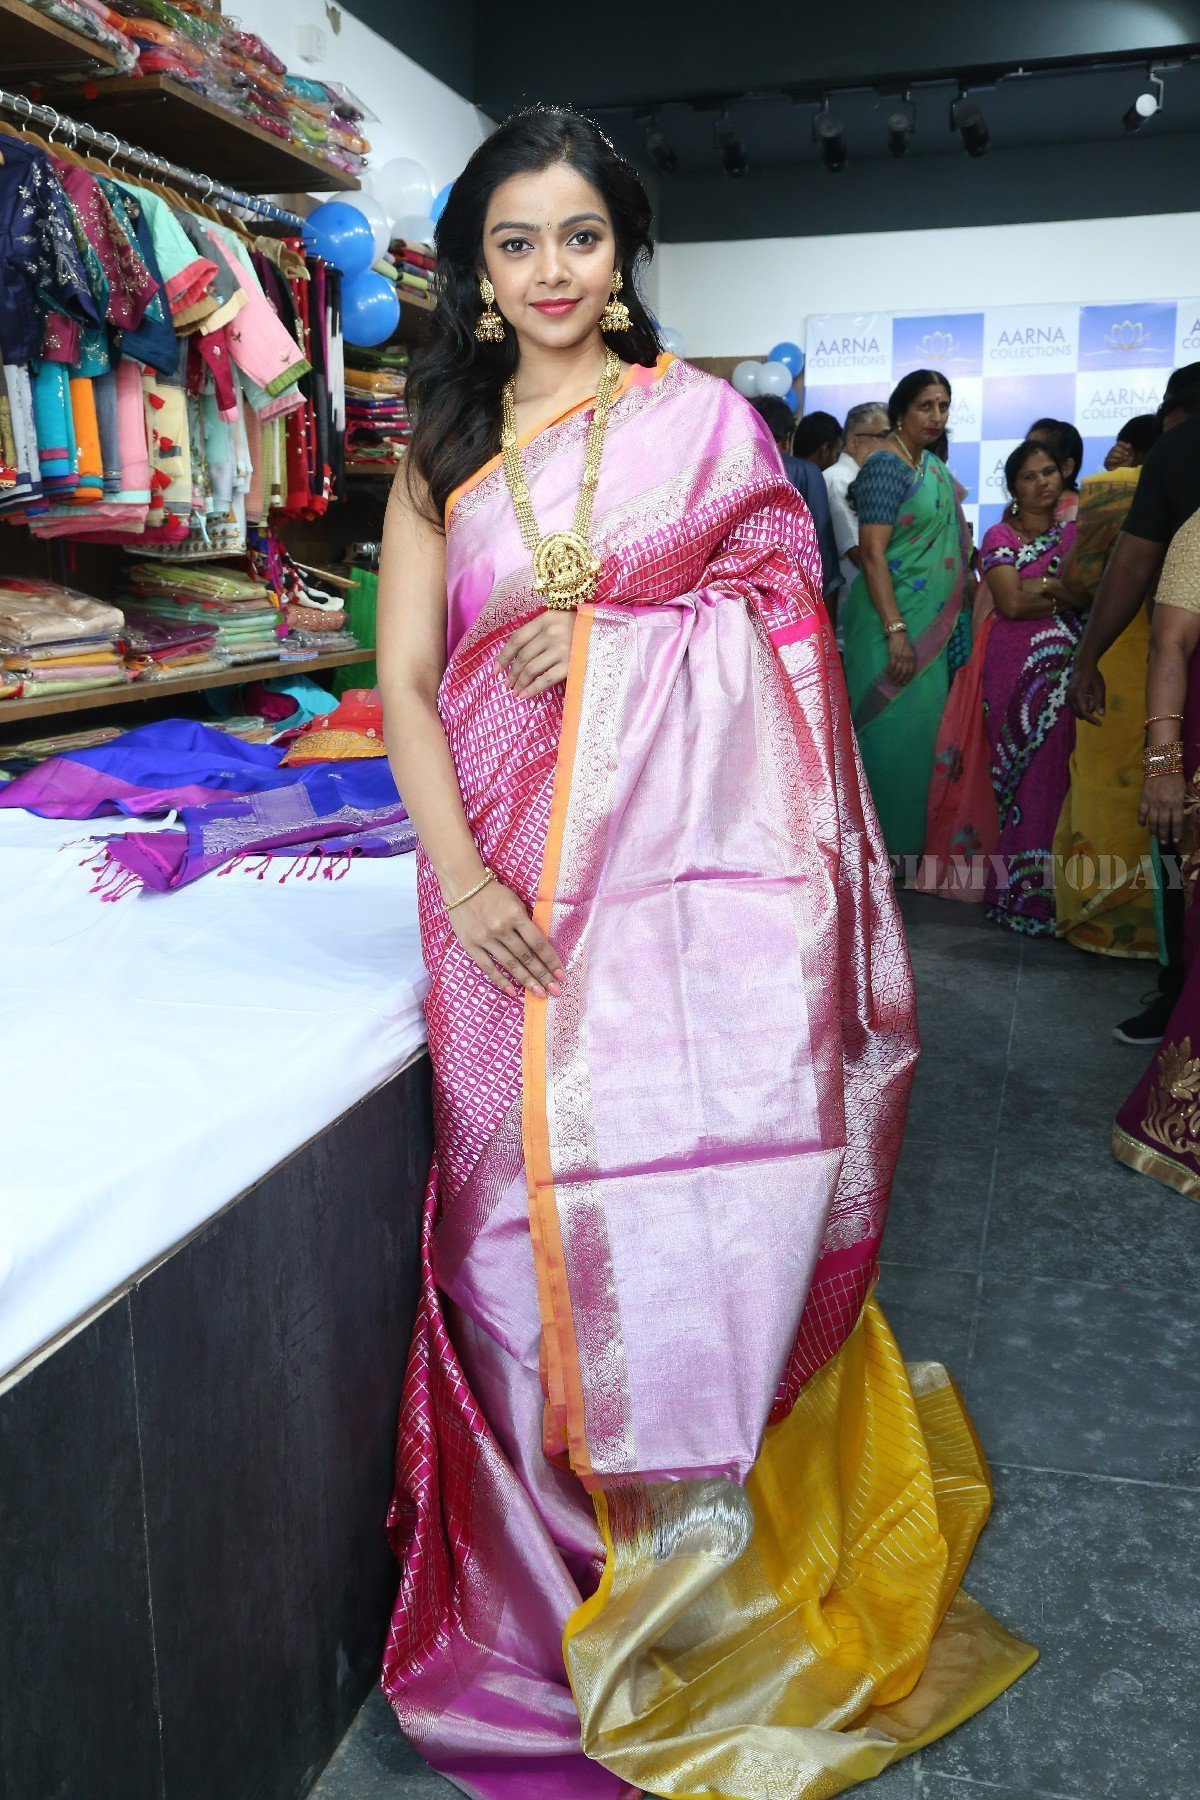 Nithya Shetty - Photos - Inauguration Of Aarna Collections at Sanikpuri | Picture 1631741